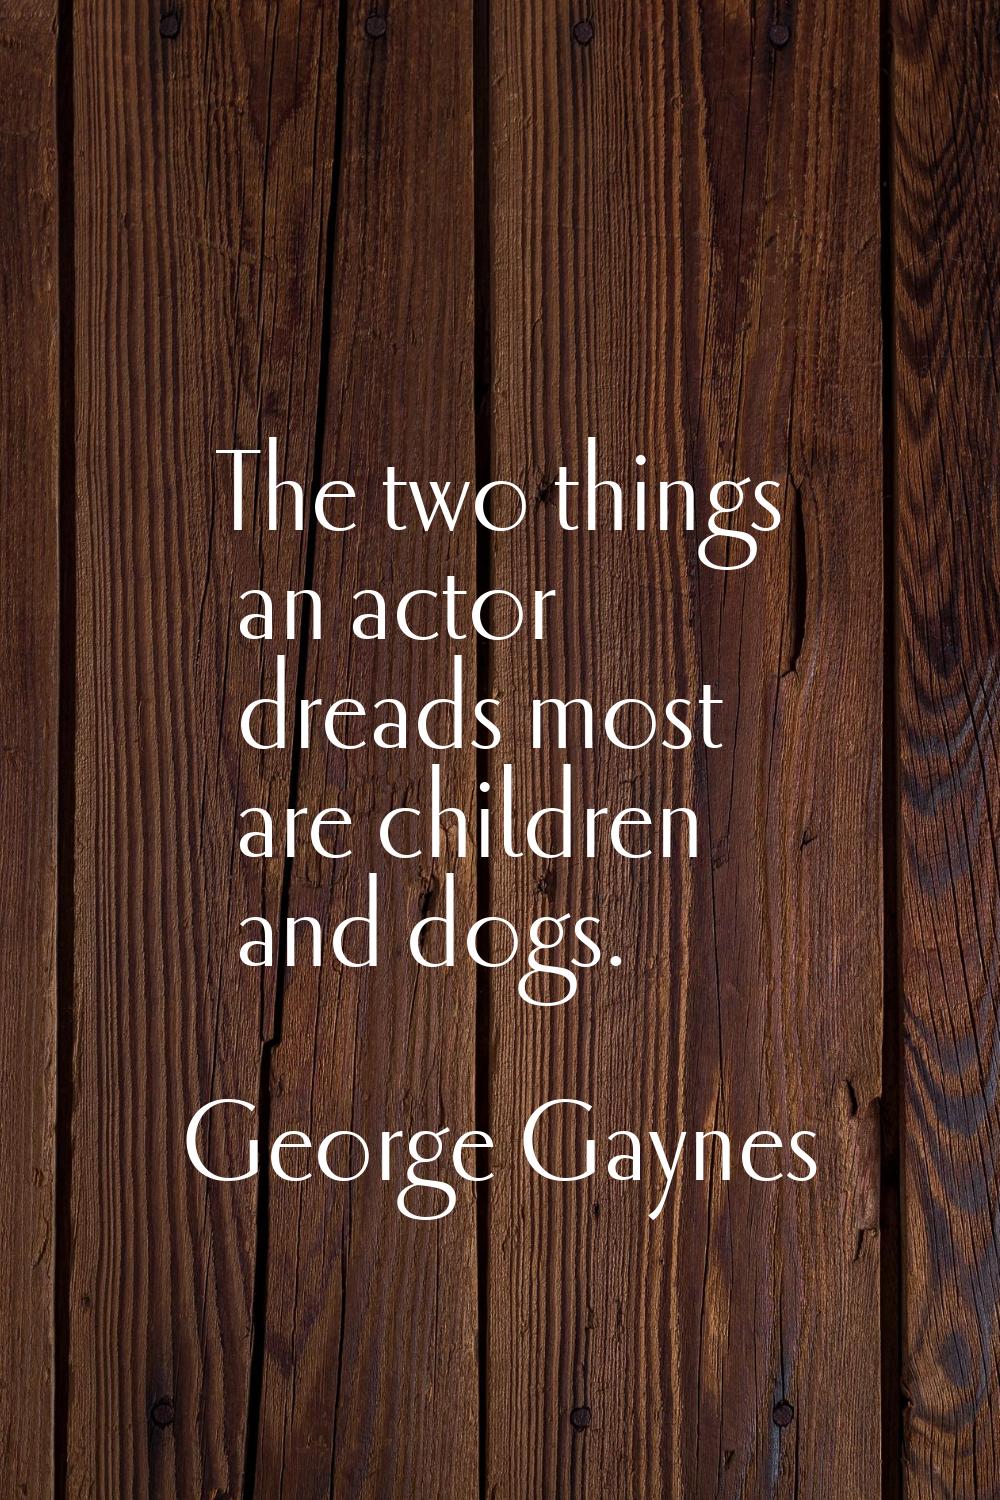 The two things an actor dreads most are children and dogs.